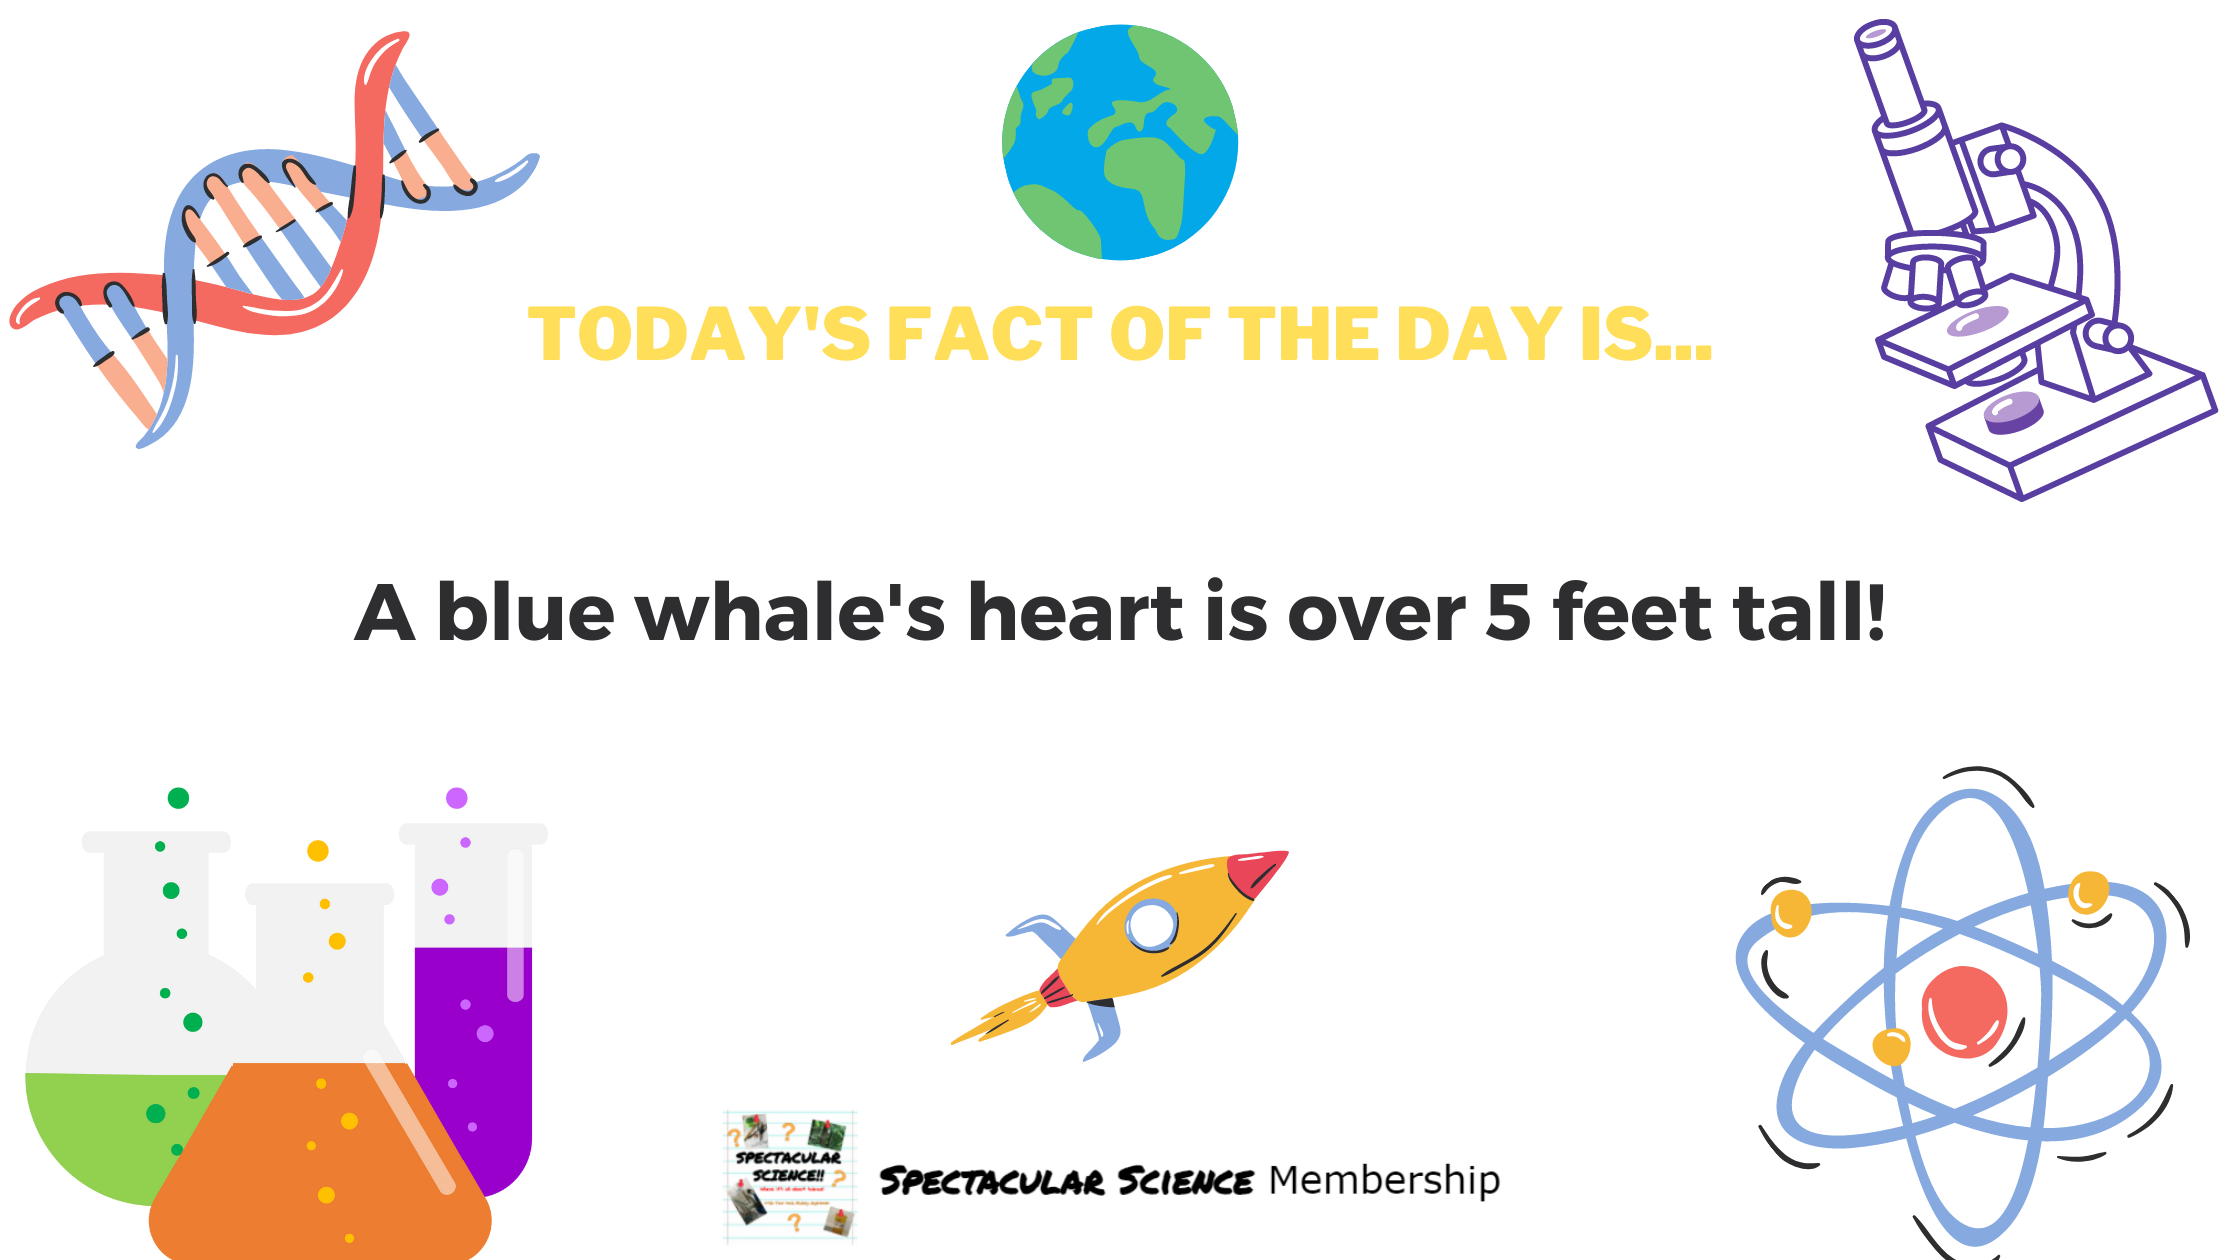 Fact of the Day Image Feb. 23rd